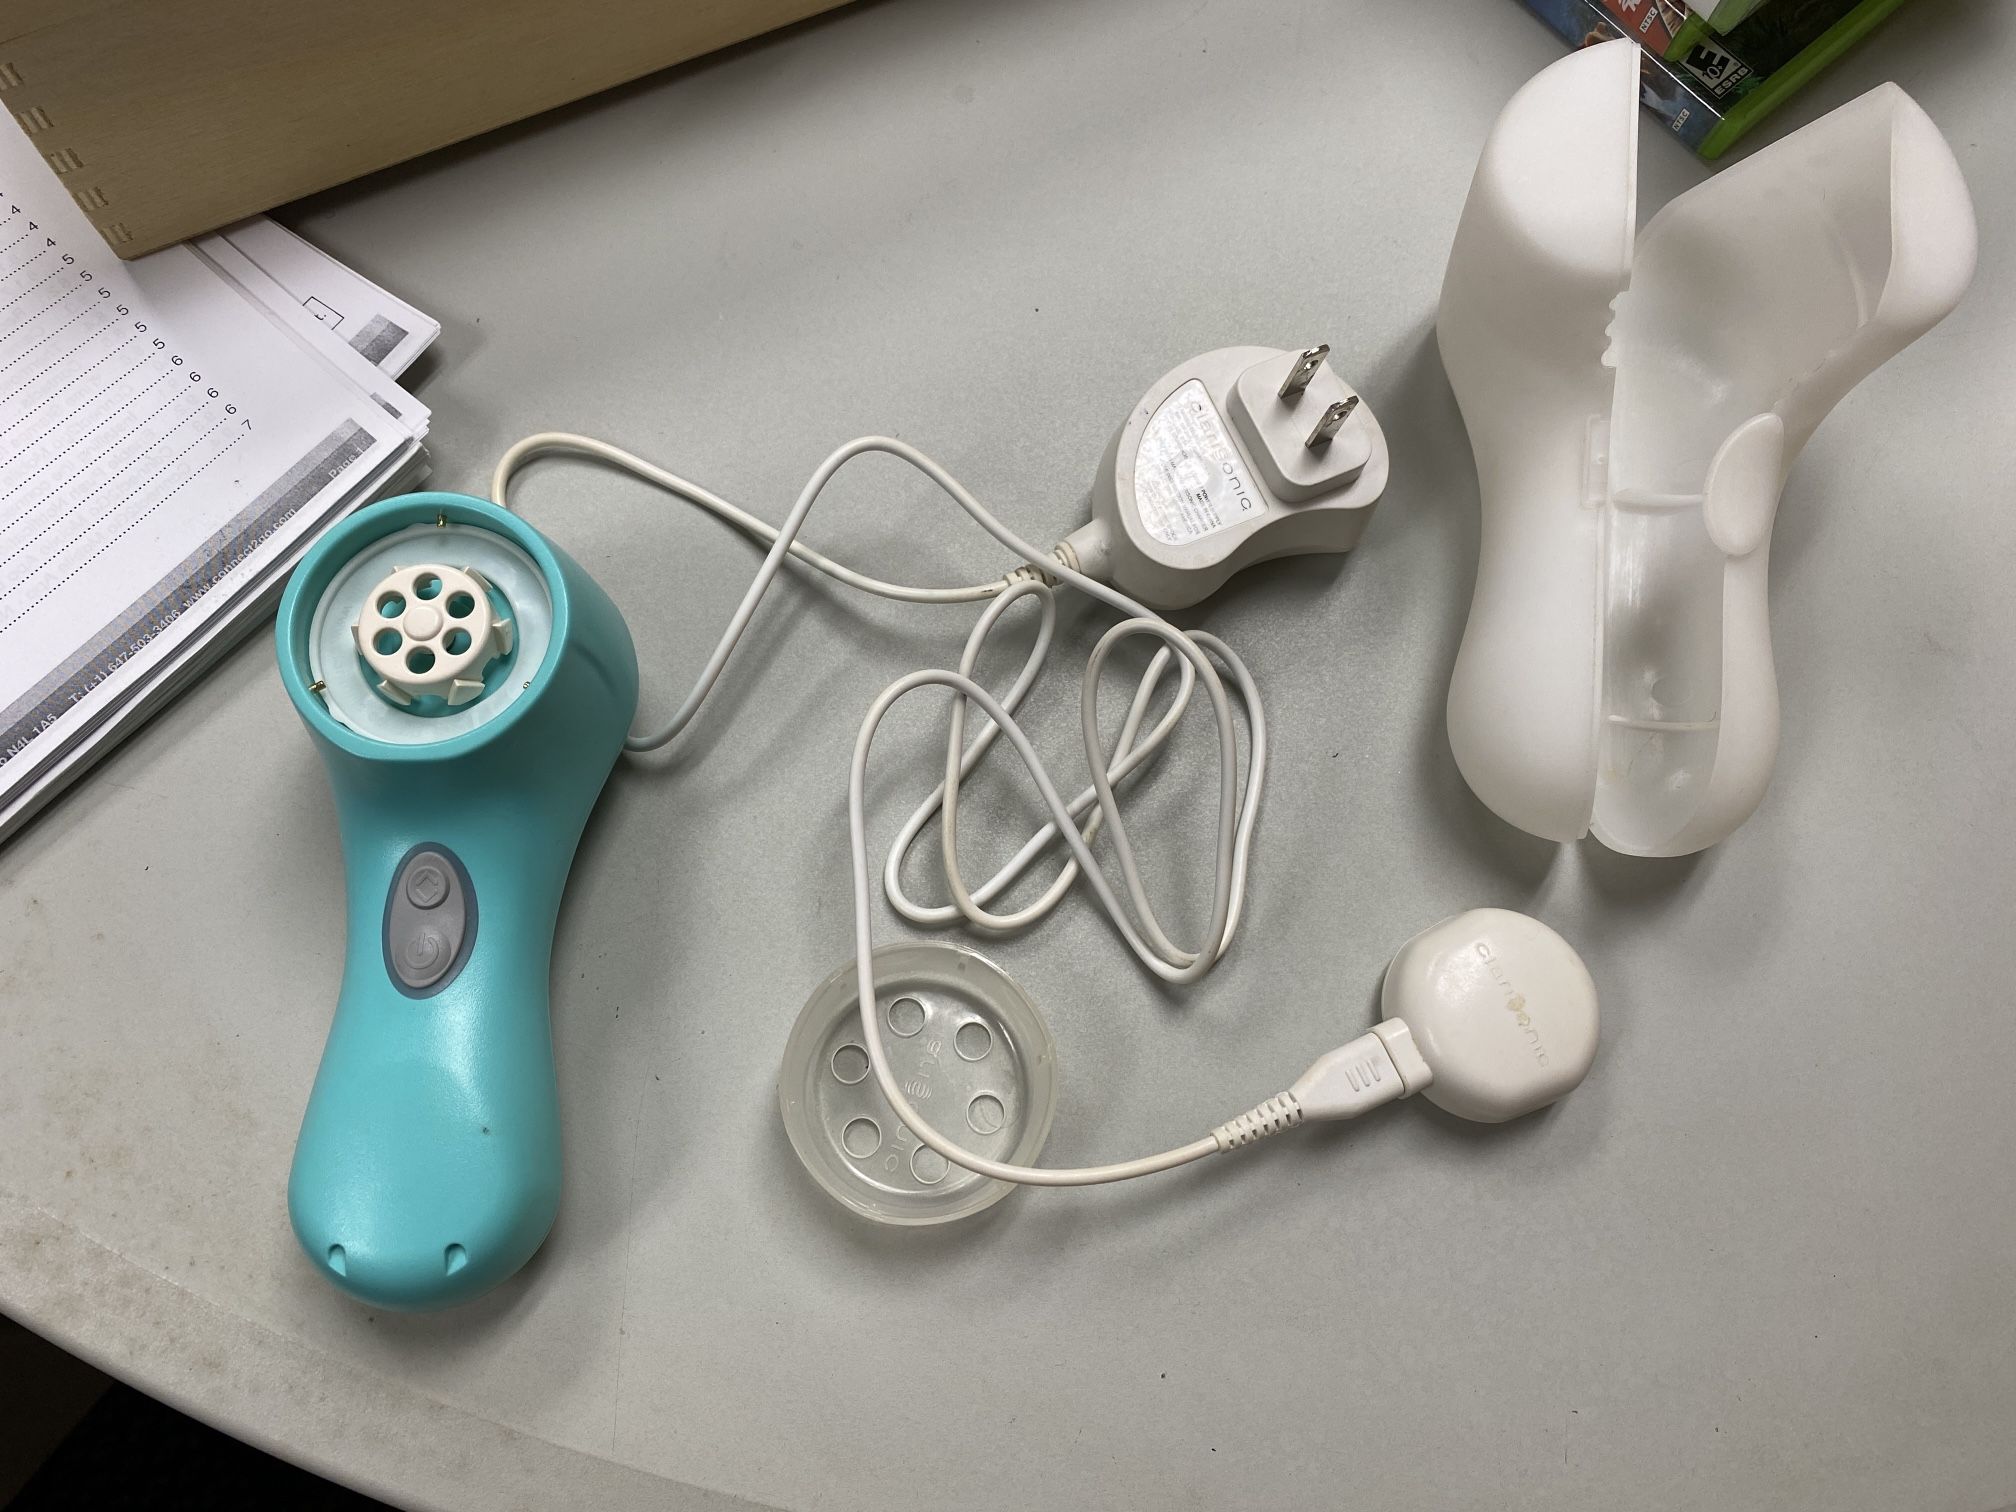 Clarisonic Mia 2: Sonic Facial Cleansing Brush System